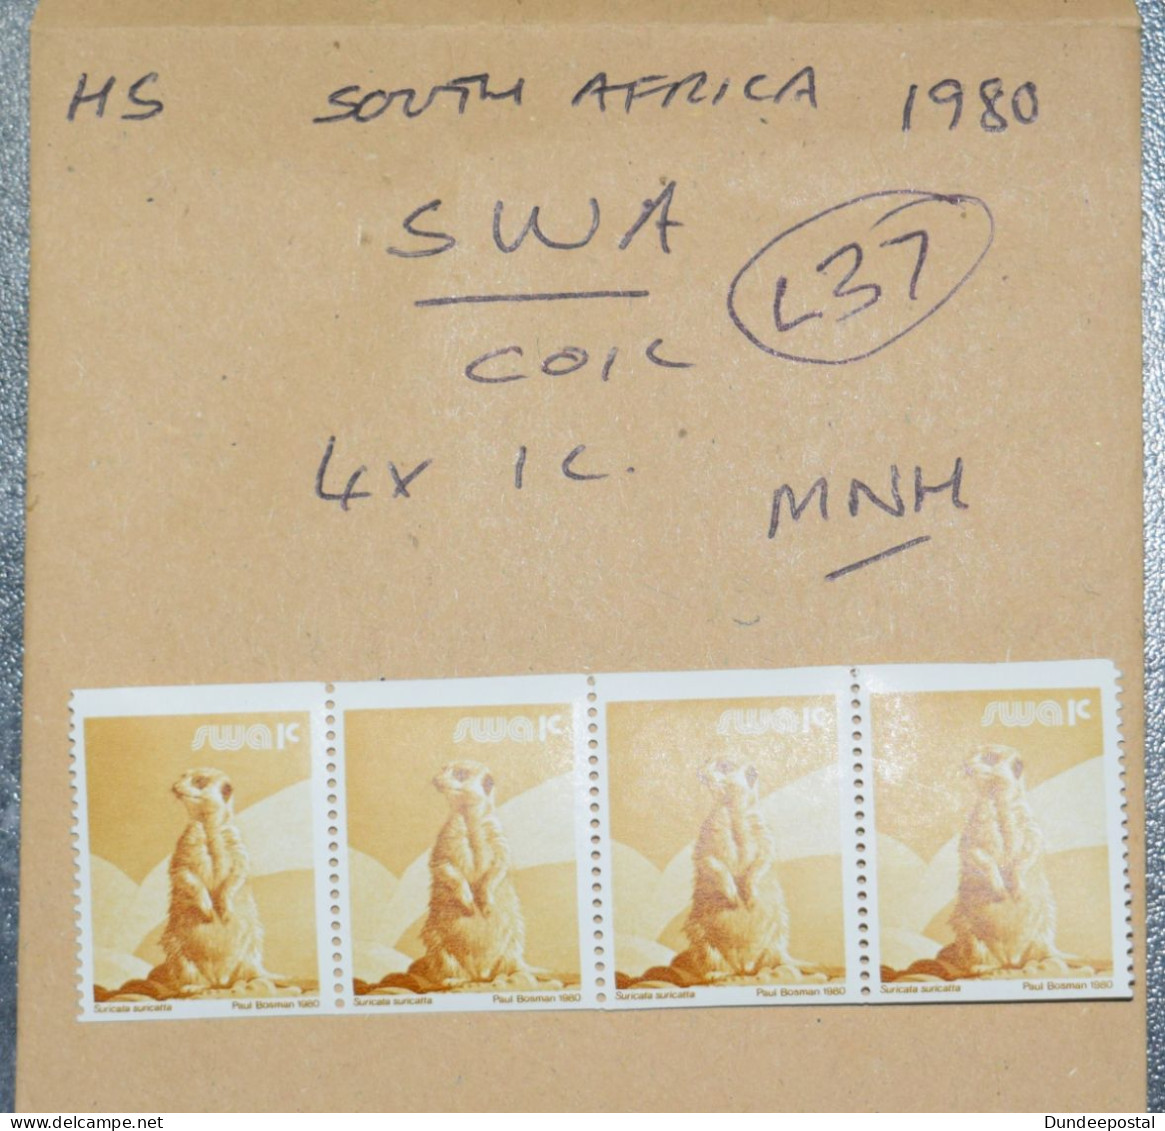 SOUTH AFRICA  STAMPS SWA Coil X 4 MNH  1980  L37  ~~L@@K~~ - Neufs